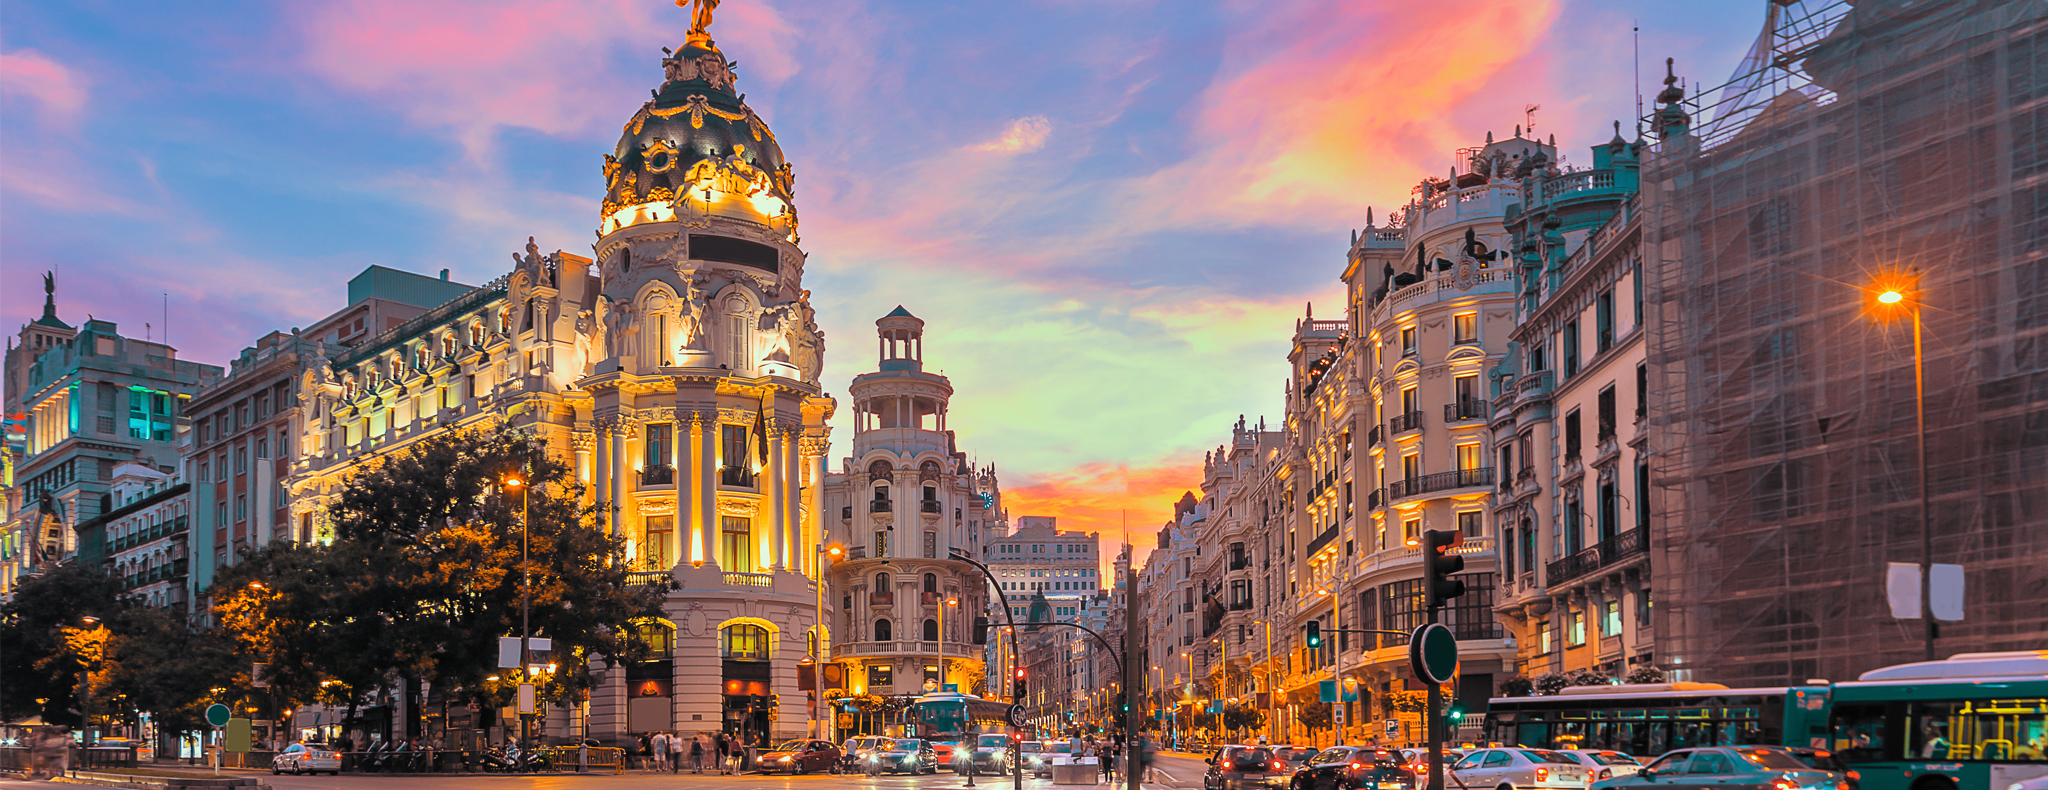 Best 10 Hotels Near Louis Vuitton(Serrano) from USD 11/Night-Madrid for  2023